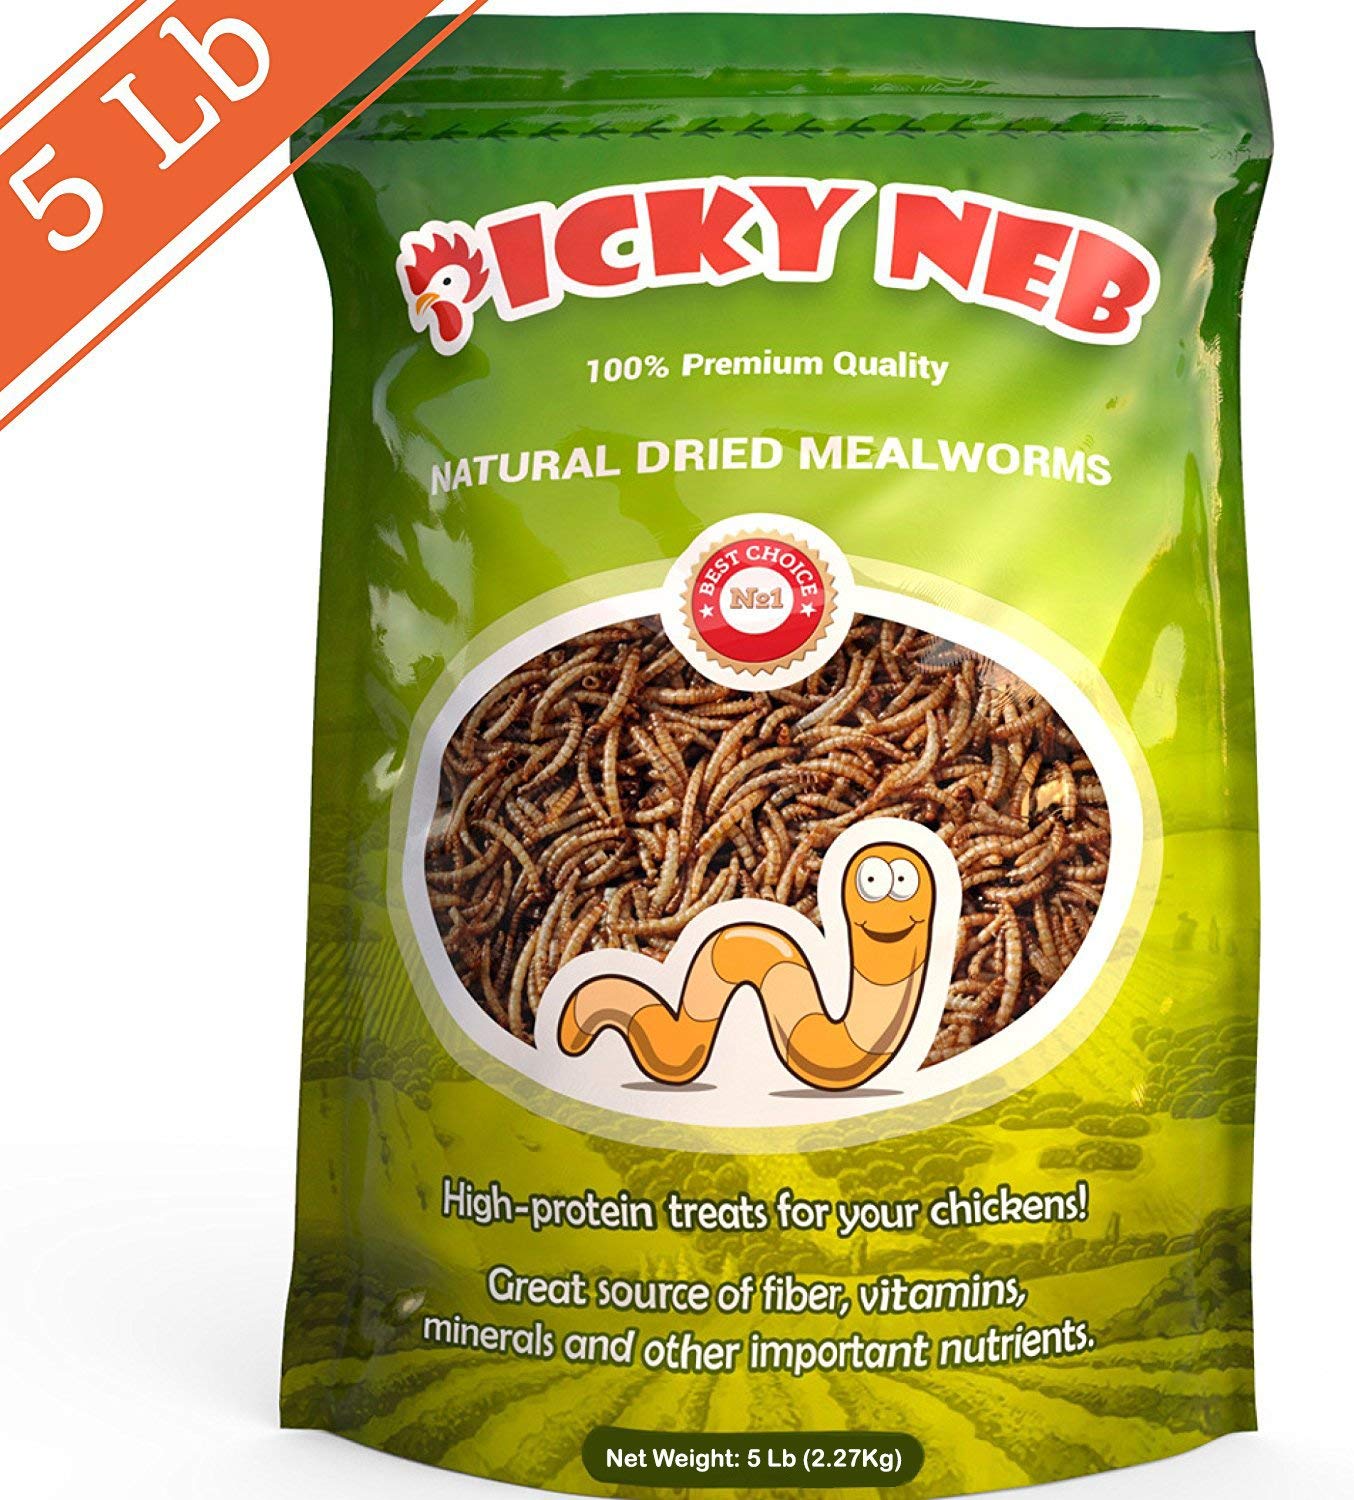 PICKY NEB Dried Mealworms